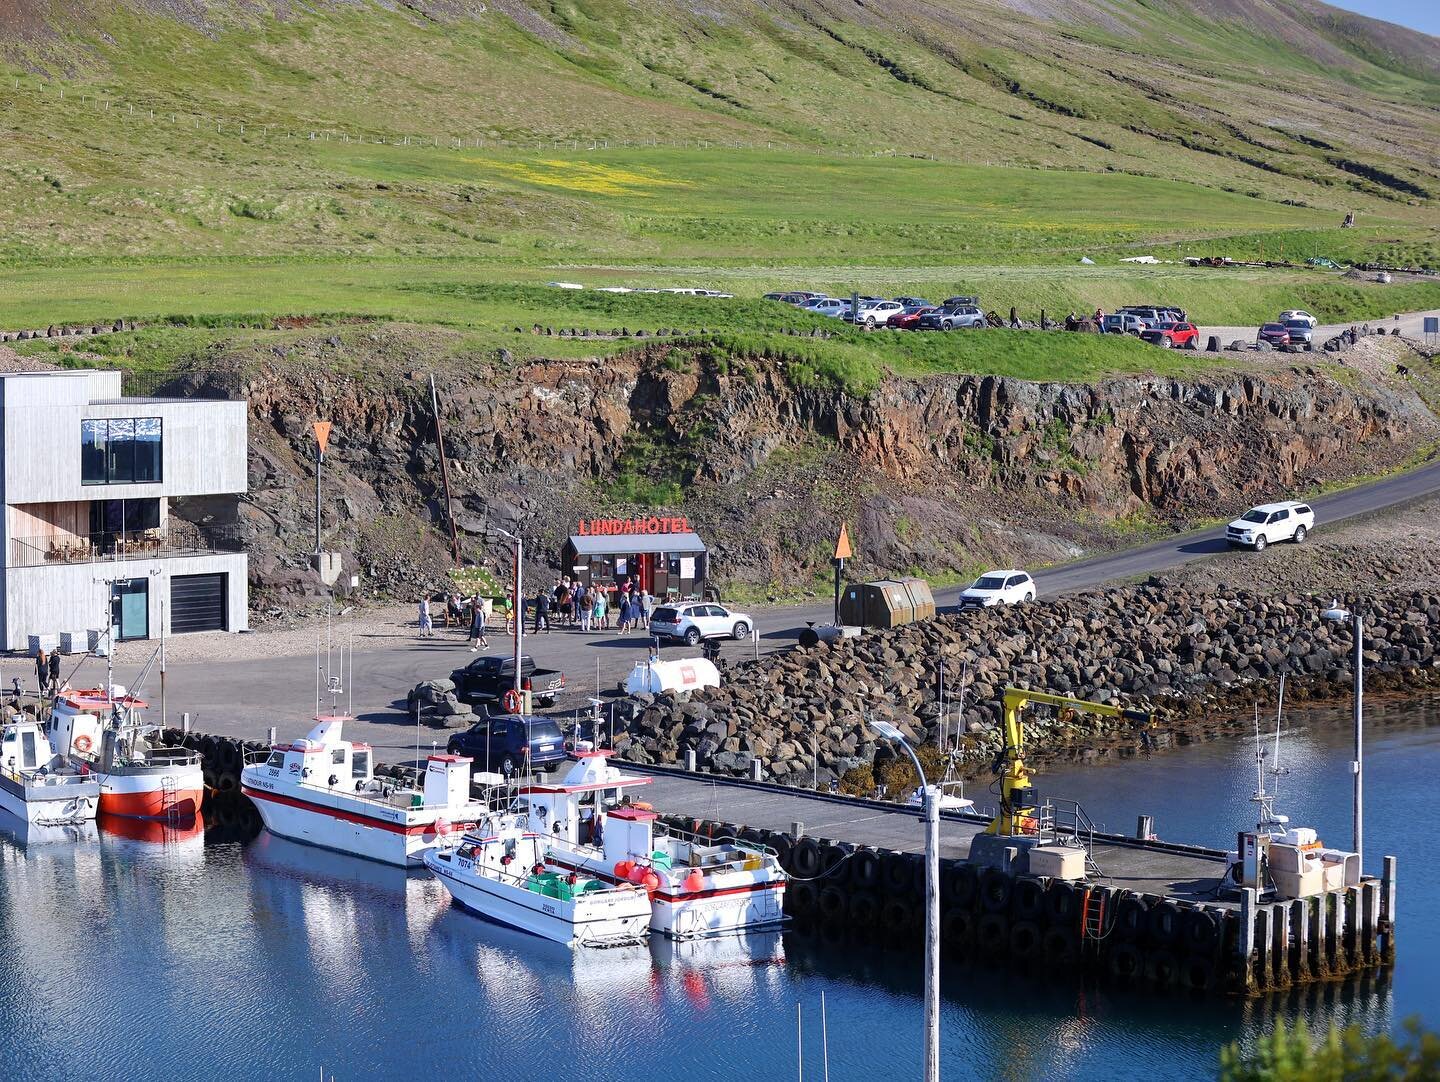 We are located in the ideal harbour of Borgarfj&ouml;r&eth;ur eystri, East Iceland, with a 15 second flight distance to downtown Hafnarh&oacute;lmi puffin colony. Photo credit : @fannarmagg